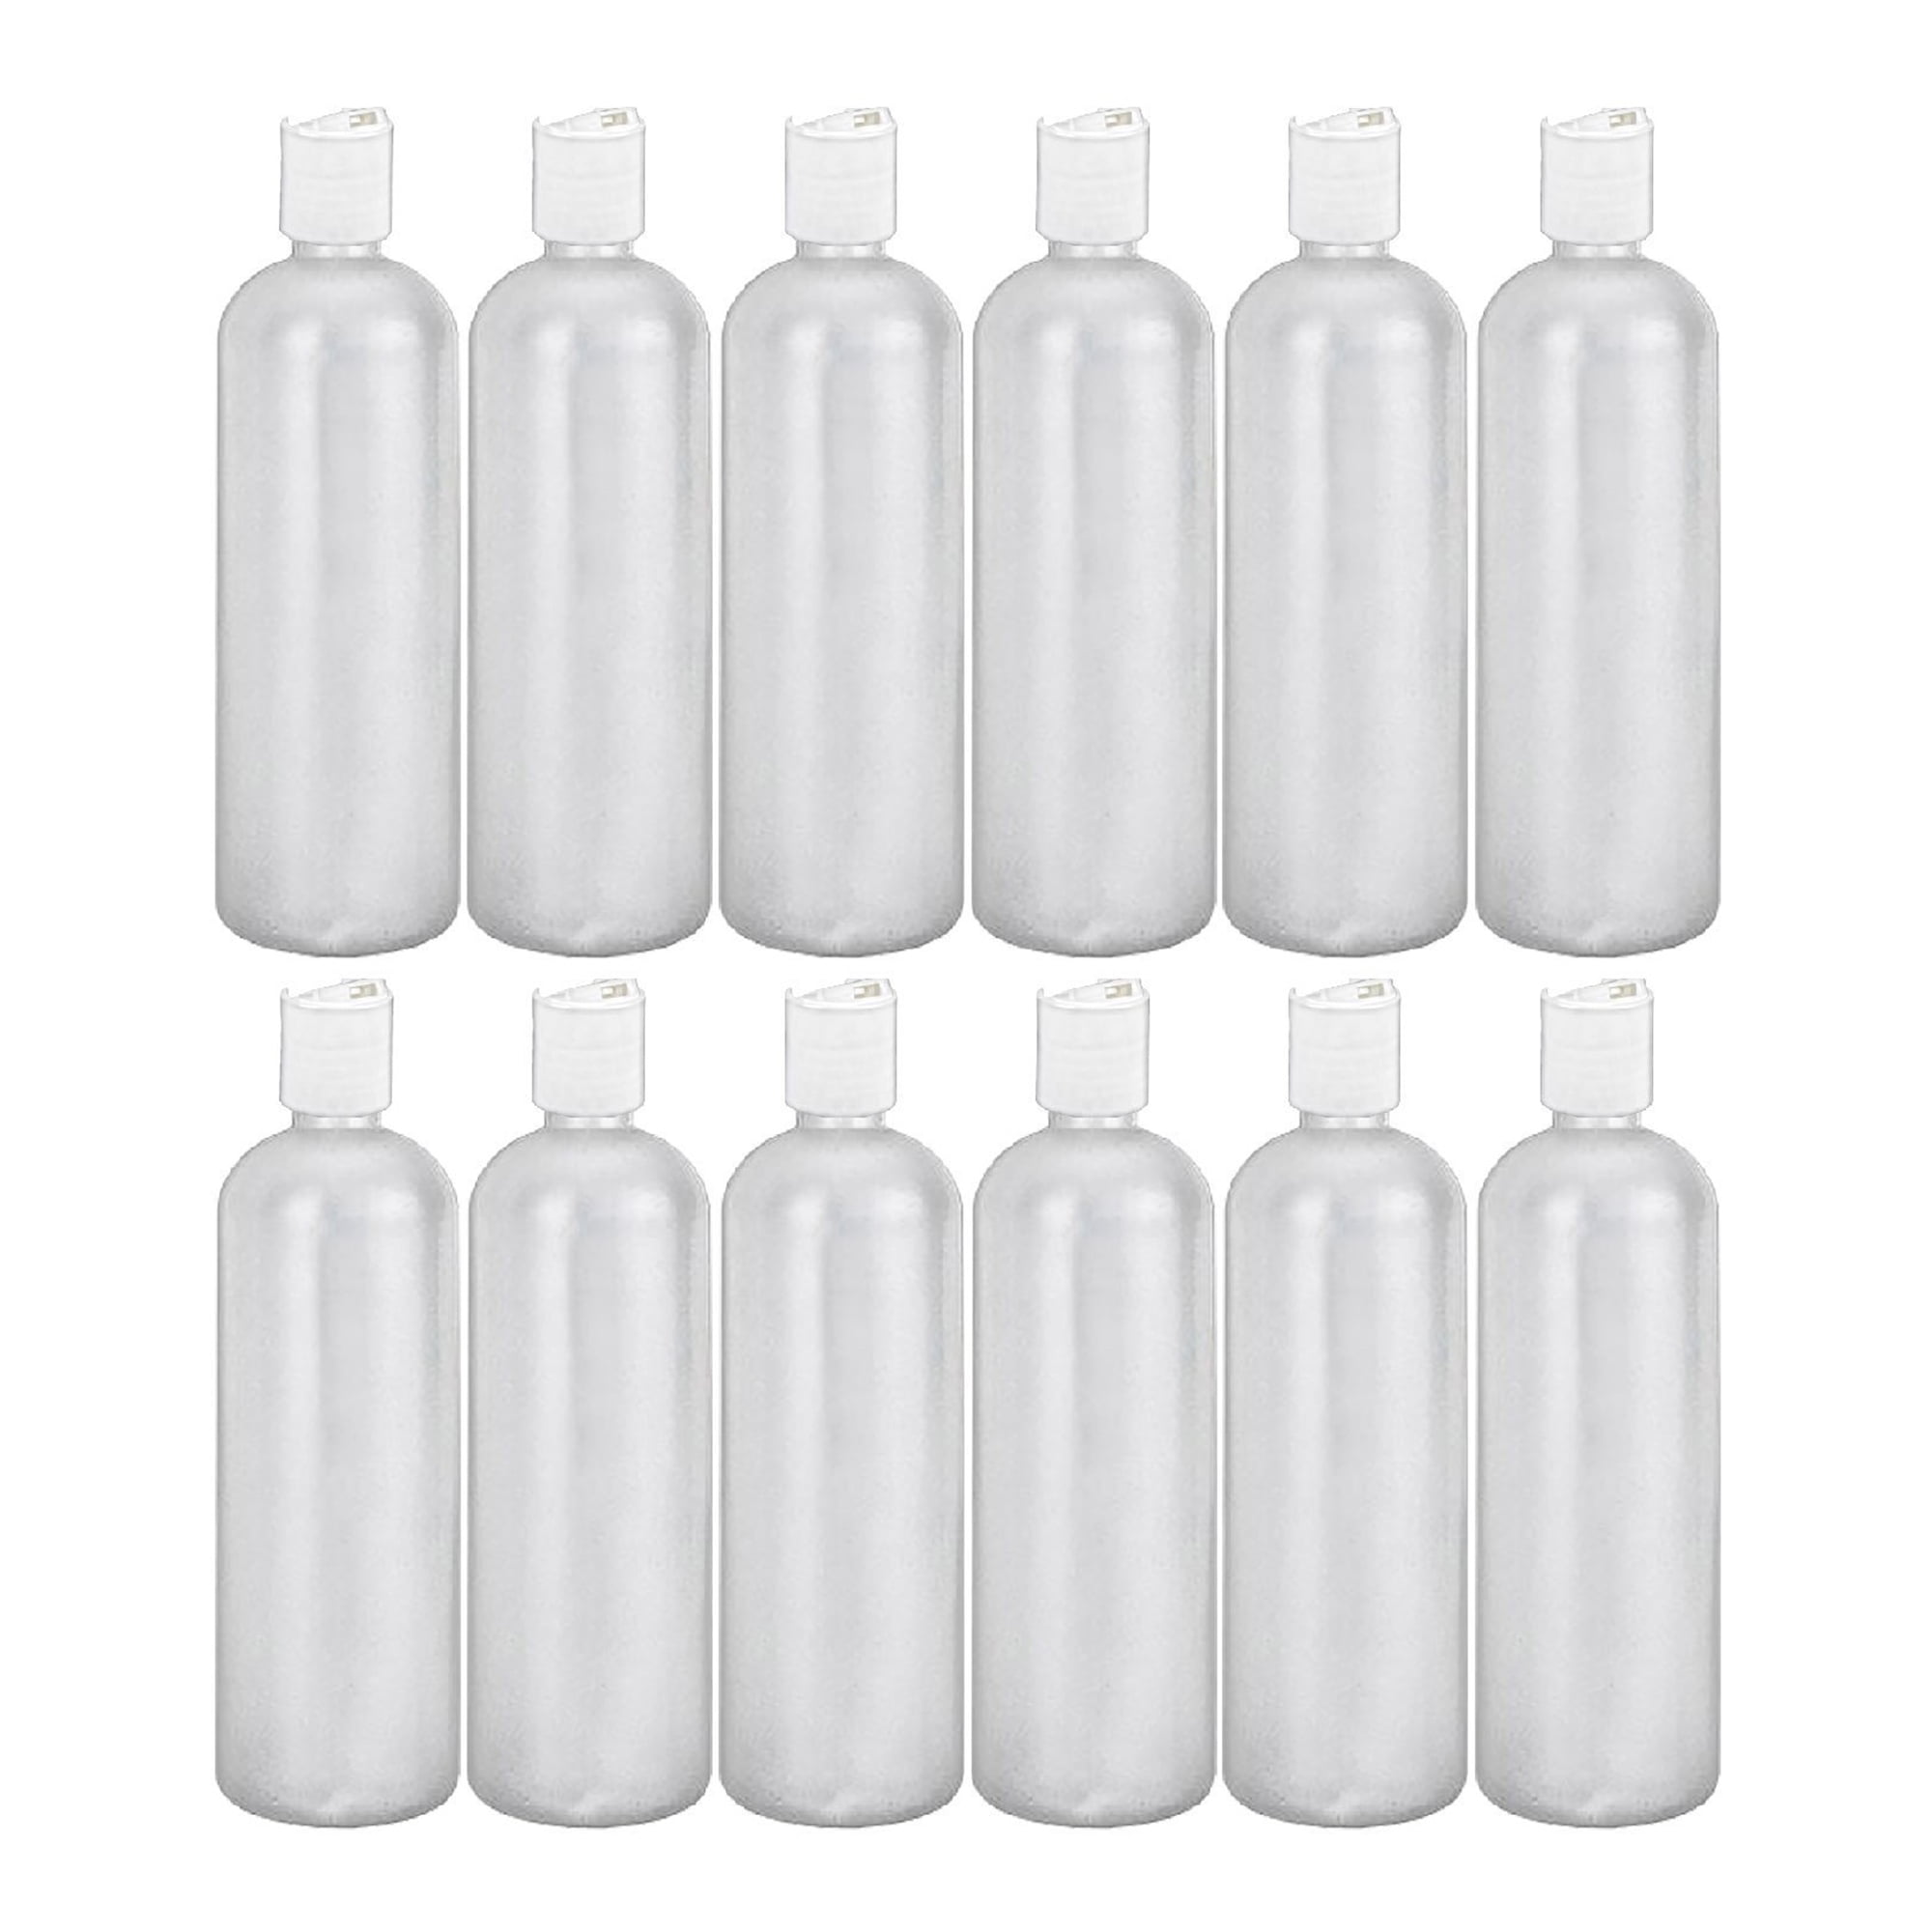 MoYo Natural Labs 16 oz Travel Containers, Empty Shampoo Bottles with